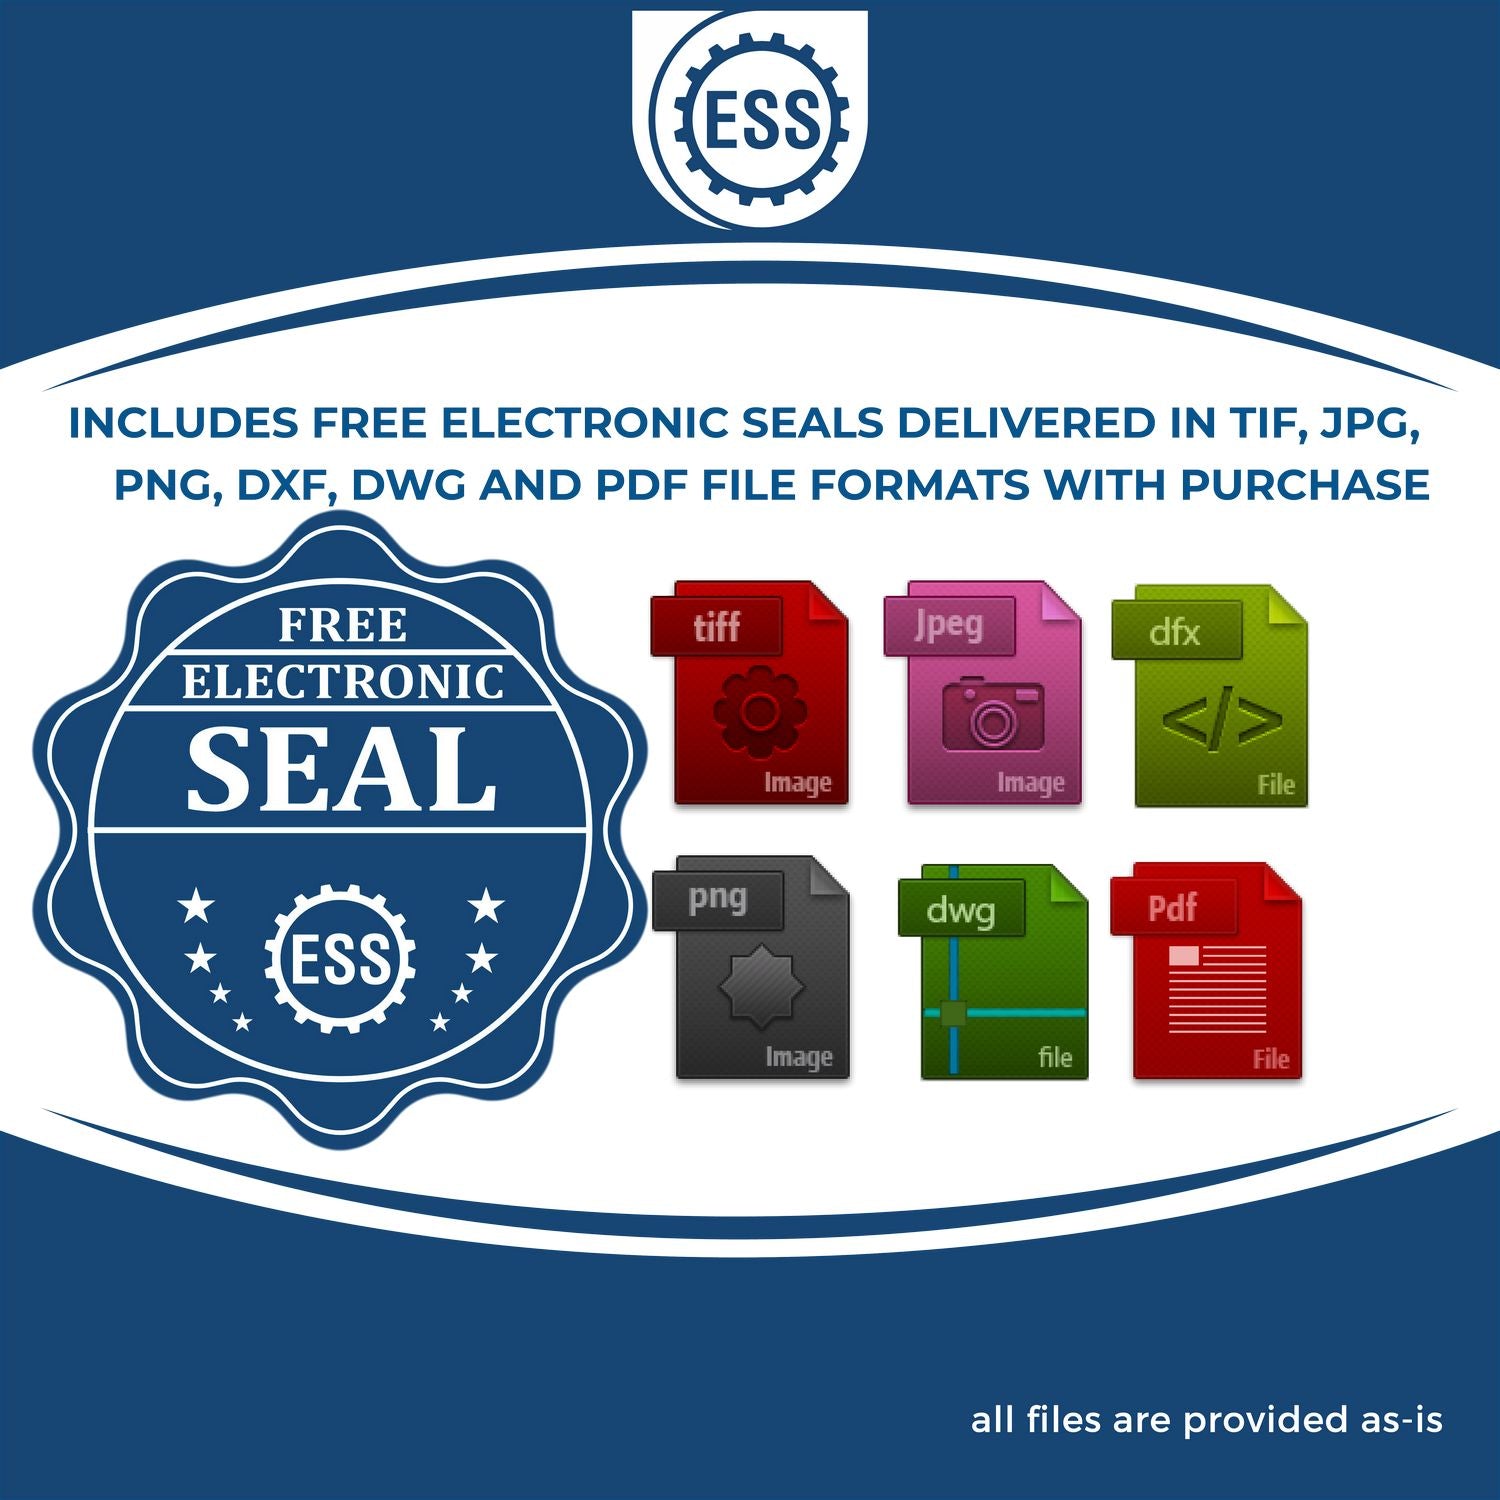 An infographic for the free electronic seal for the Self-Inking State Seal Mississippi Notary Stamp illustrating the different file type icons such as DXF, DWG, TIF, JPG and PNG.